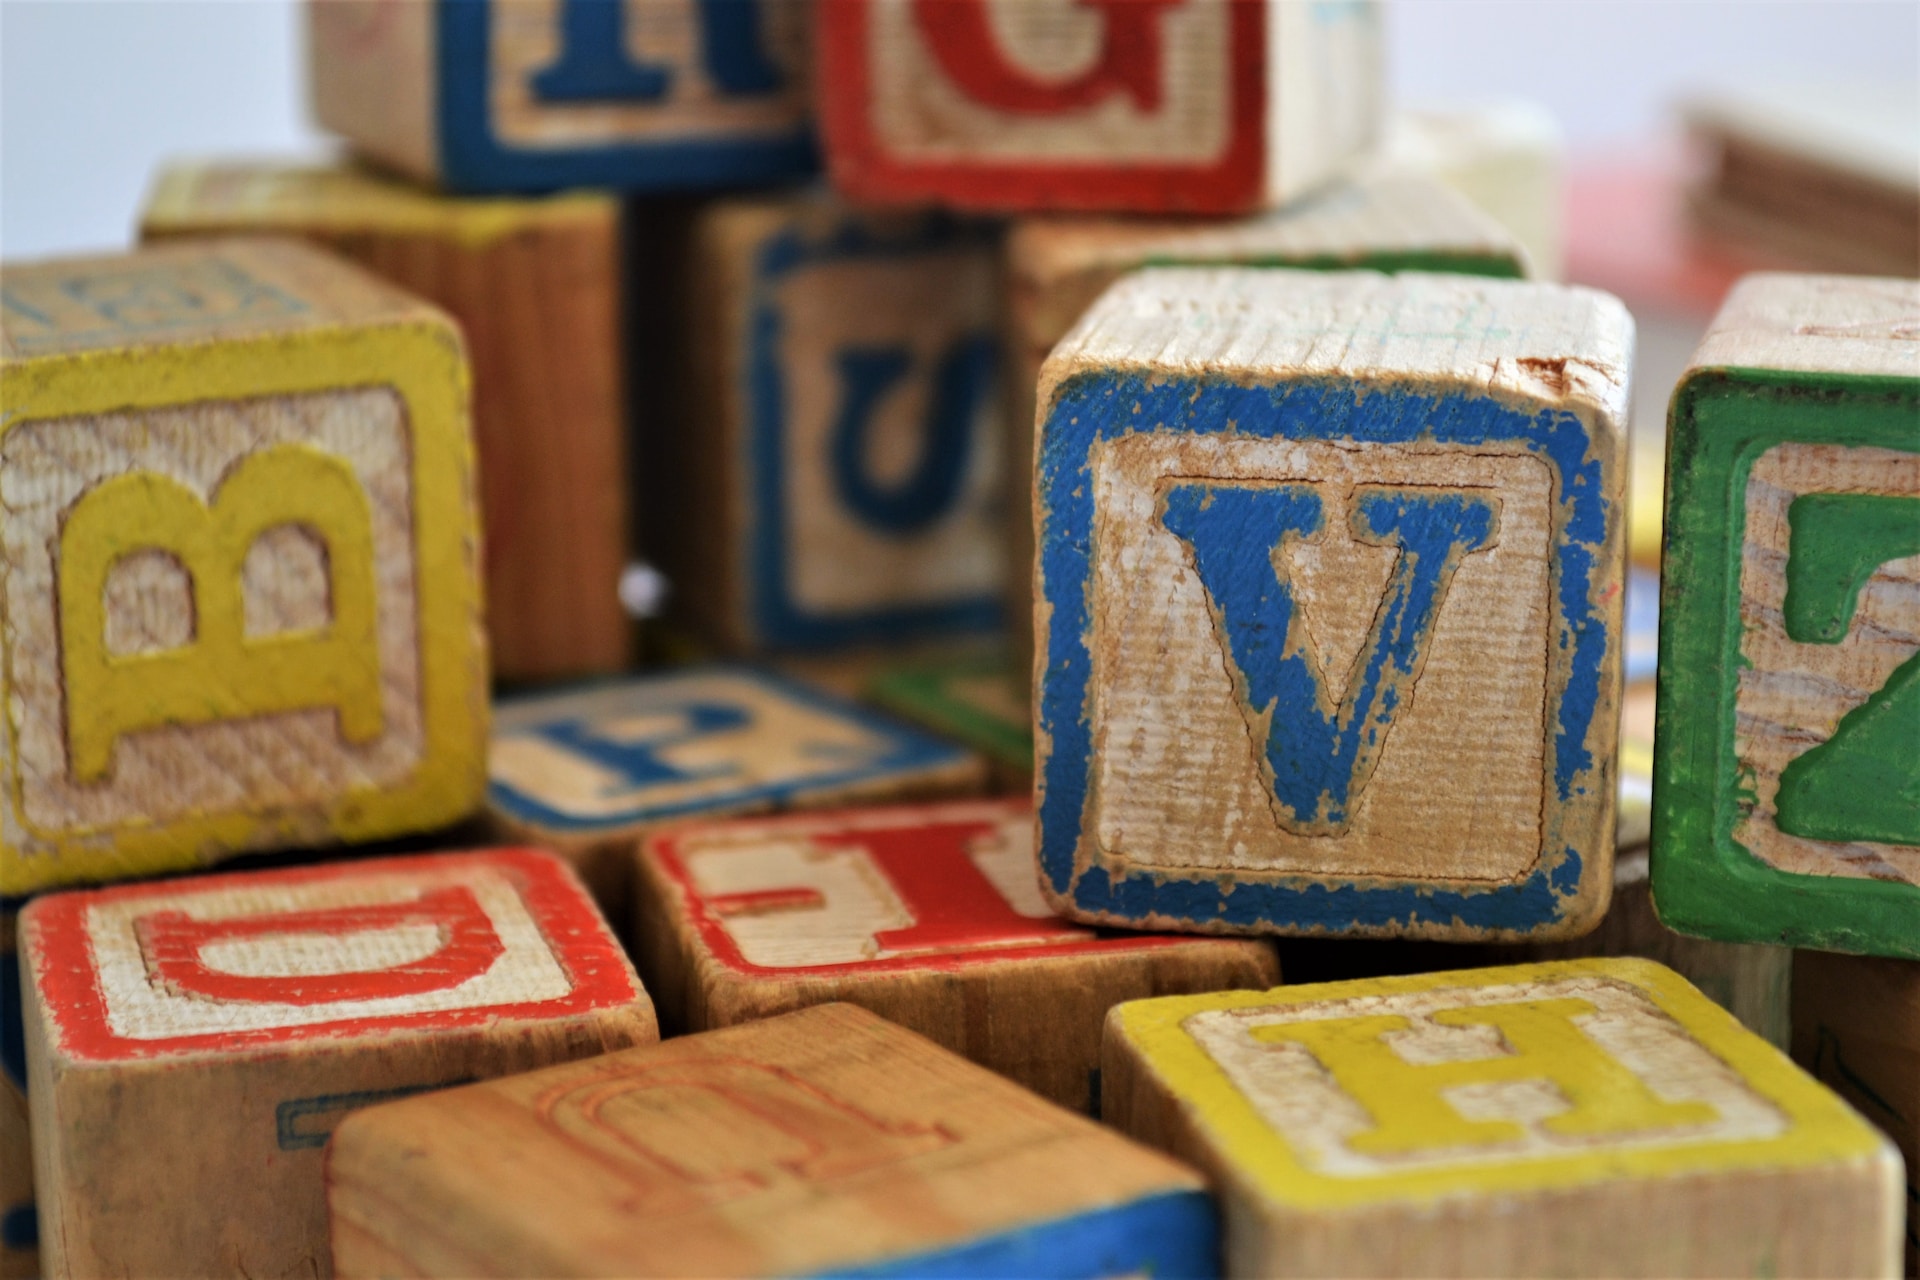 colored, wooden toy blocks stacked randomly